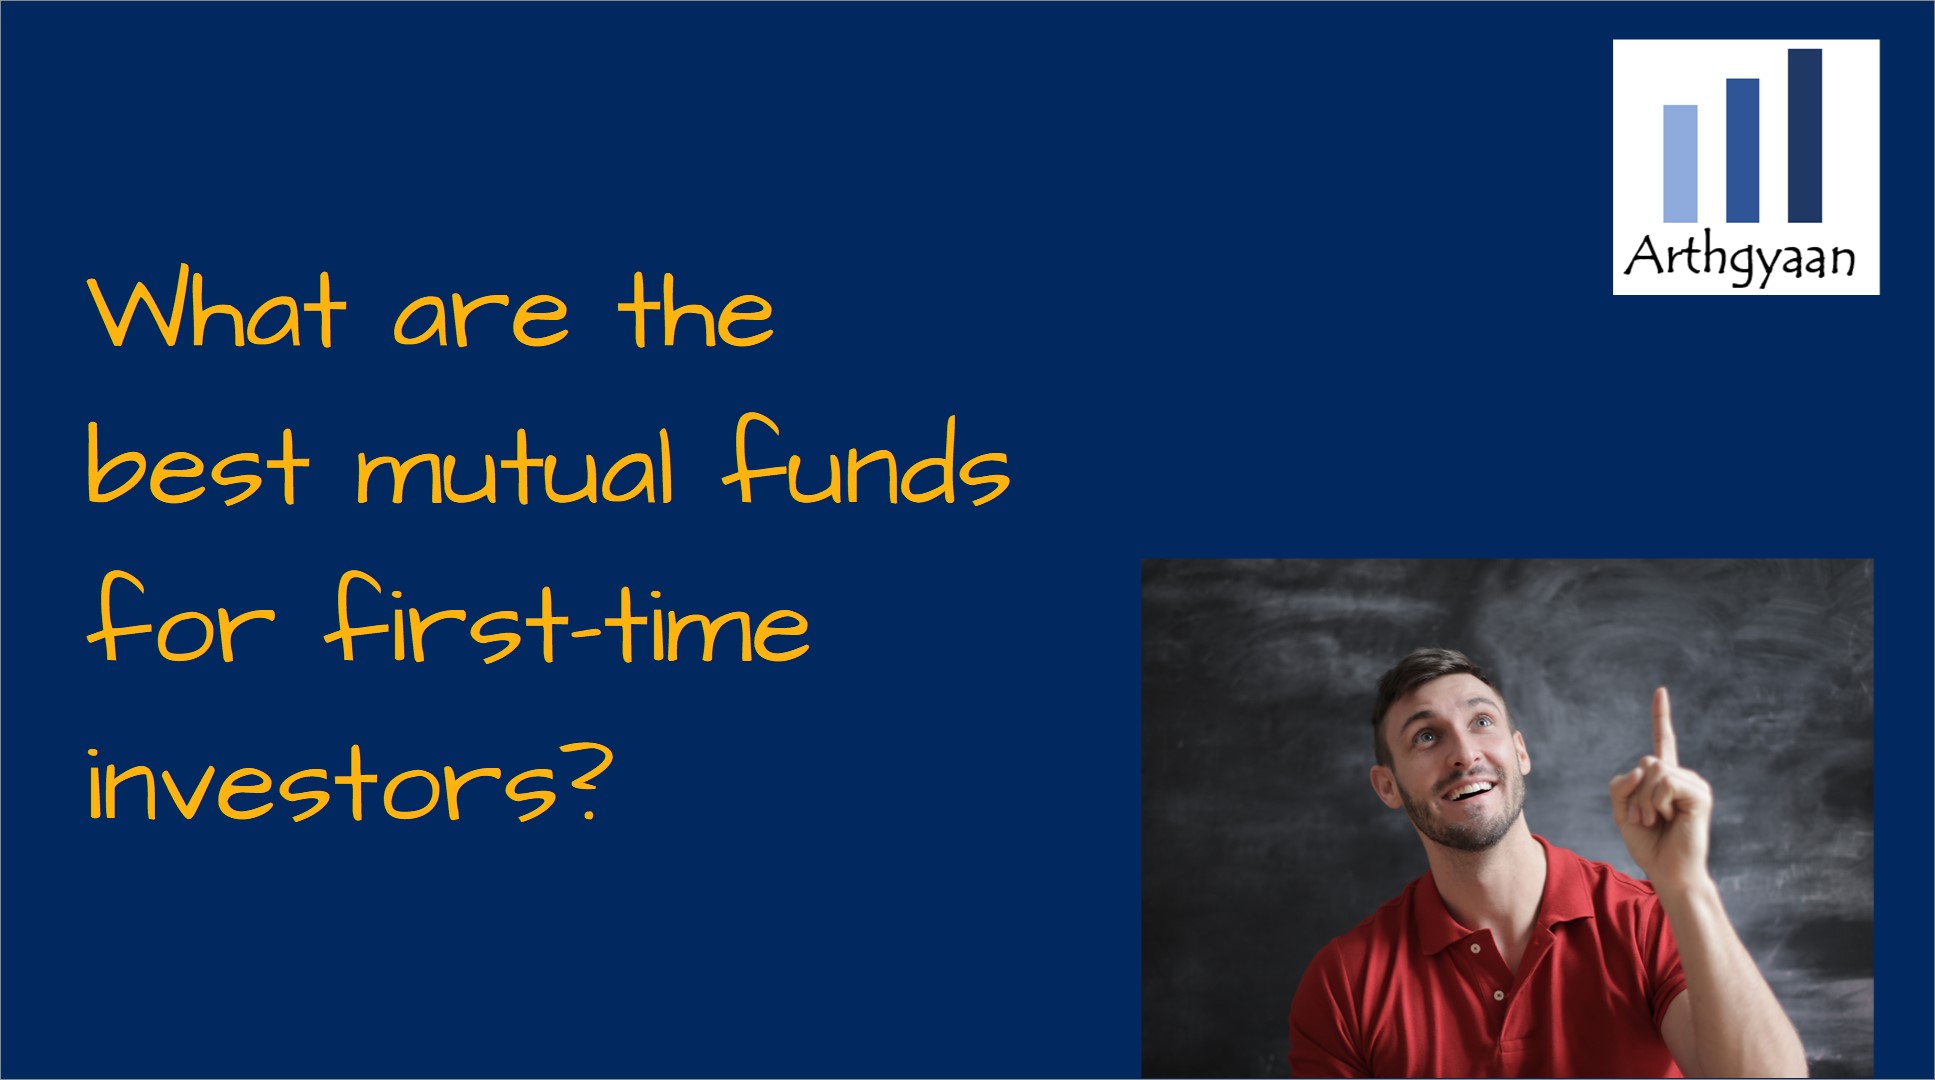 What are the best mutual funds for first-time investors?